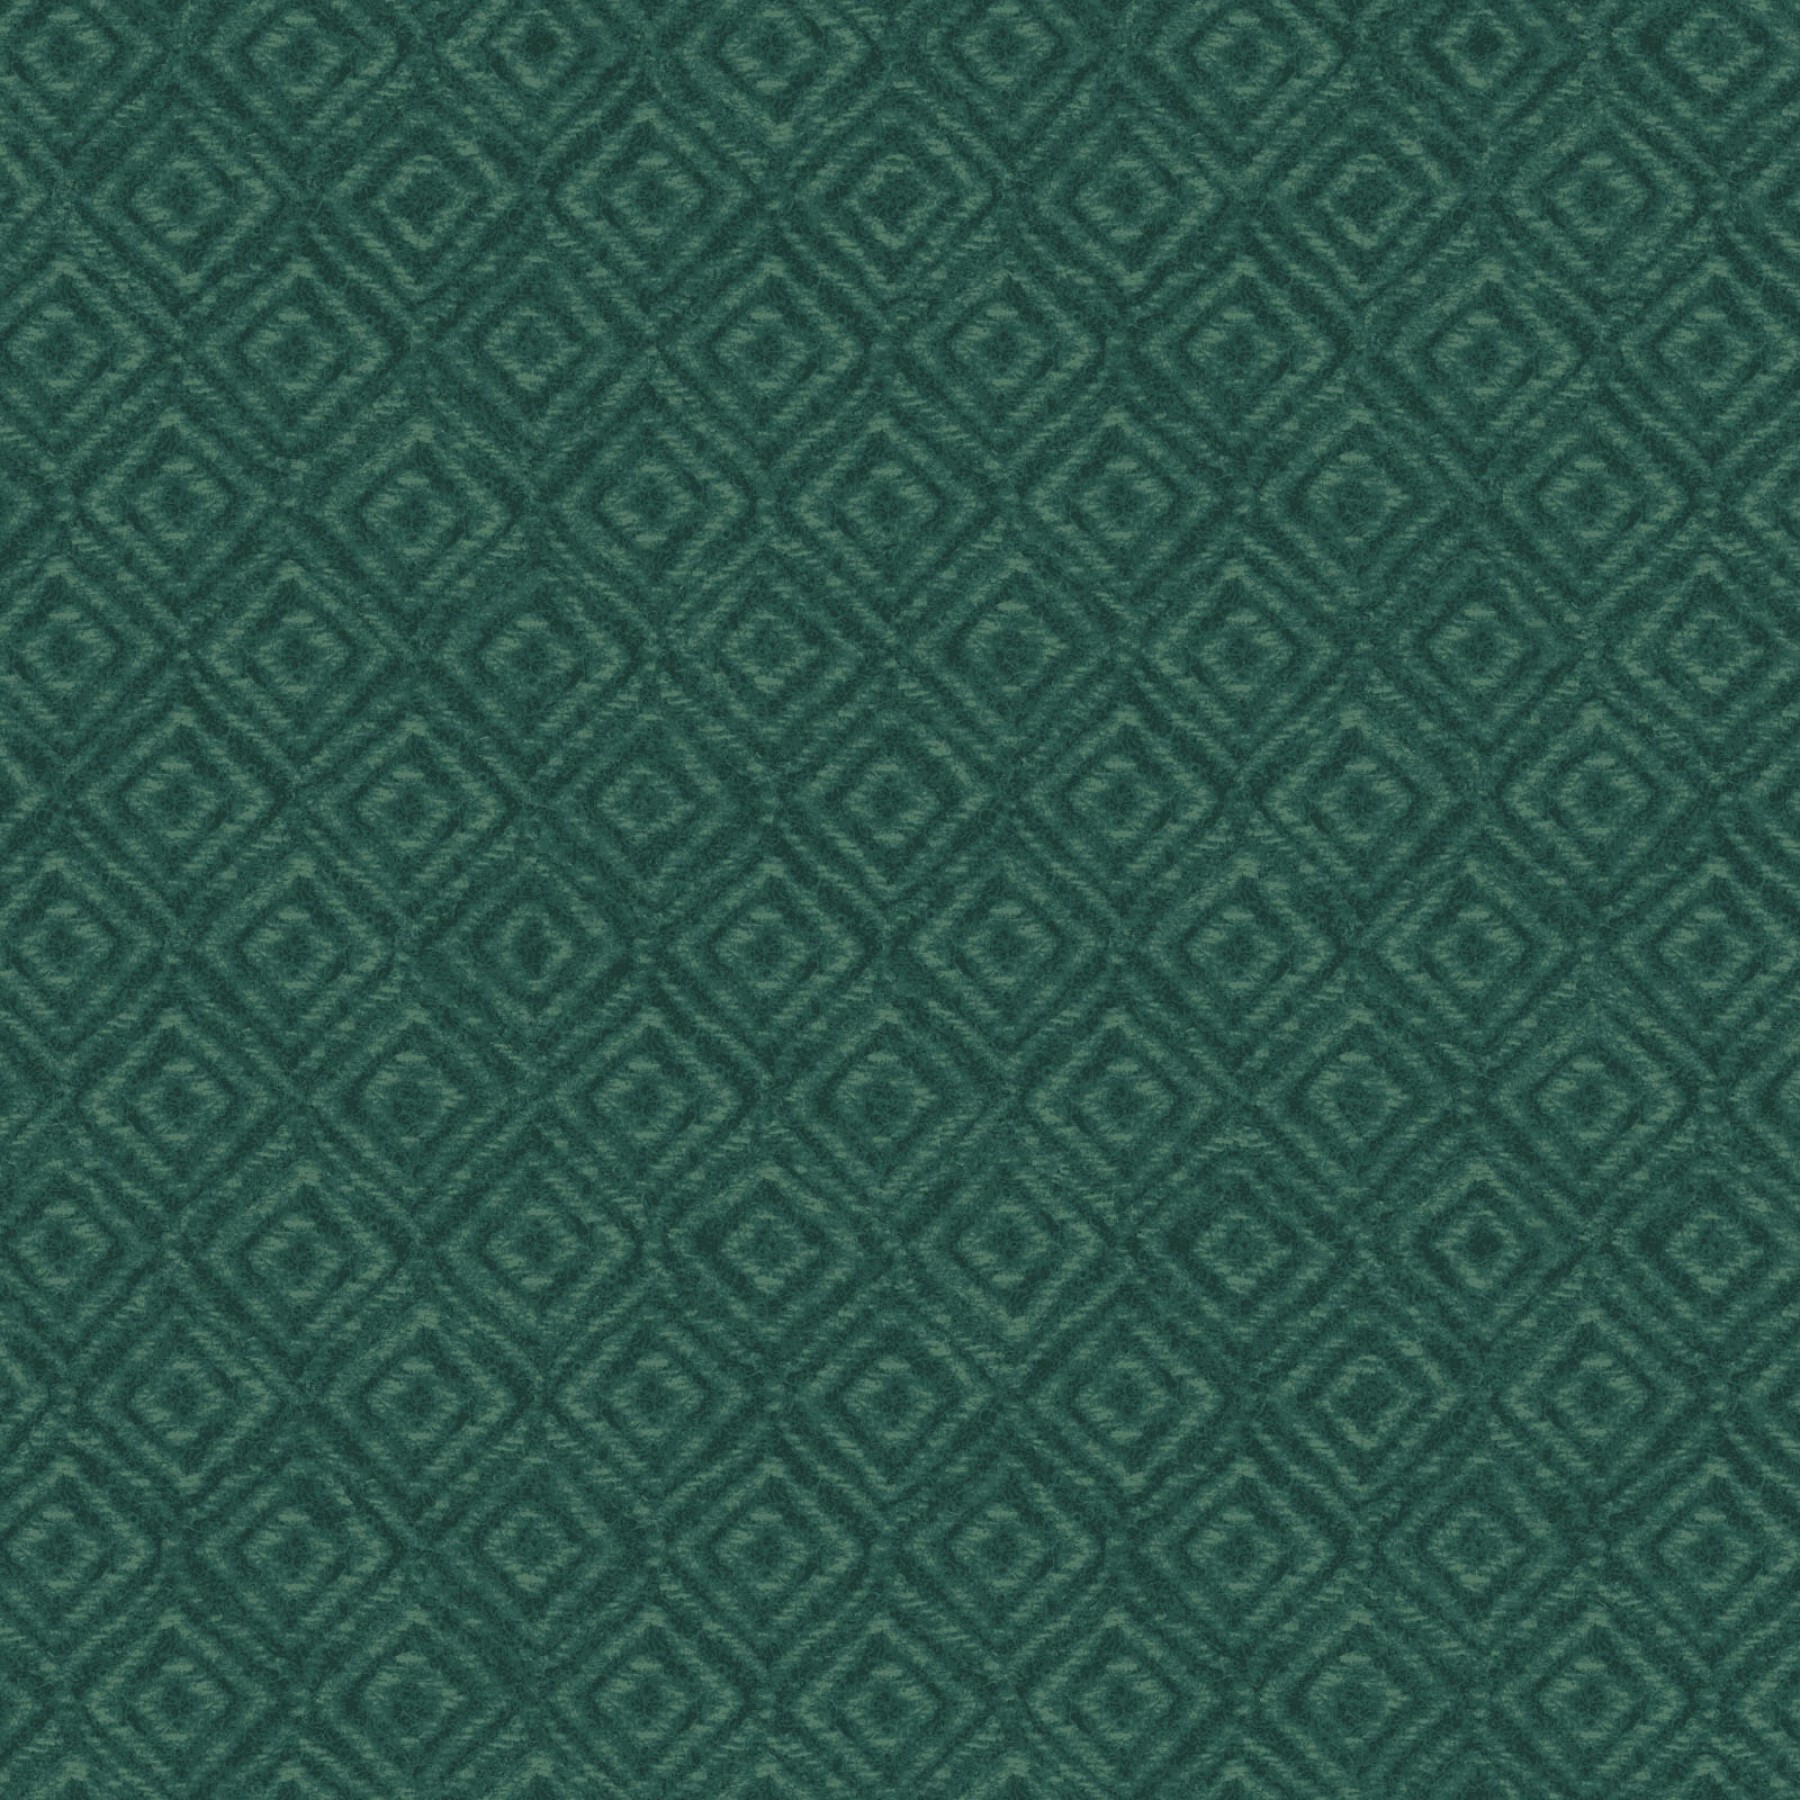 Woolies Flannel - Teal On Point - 1/2m cut 58208